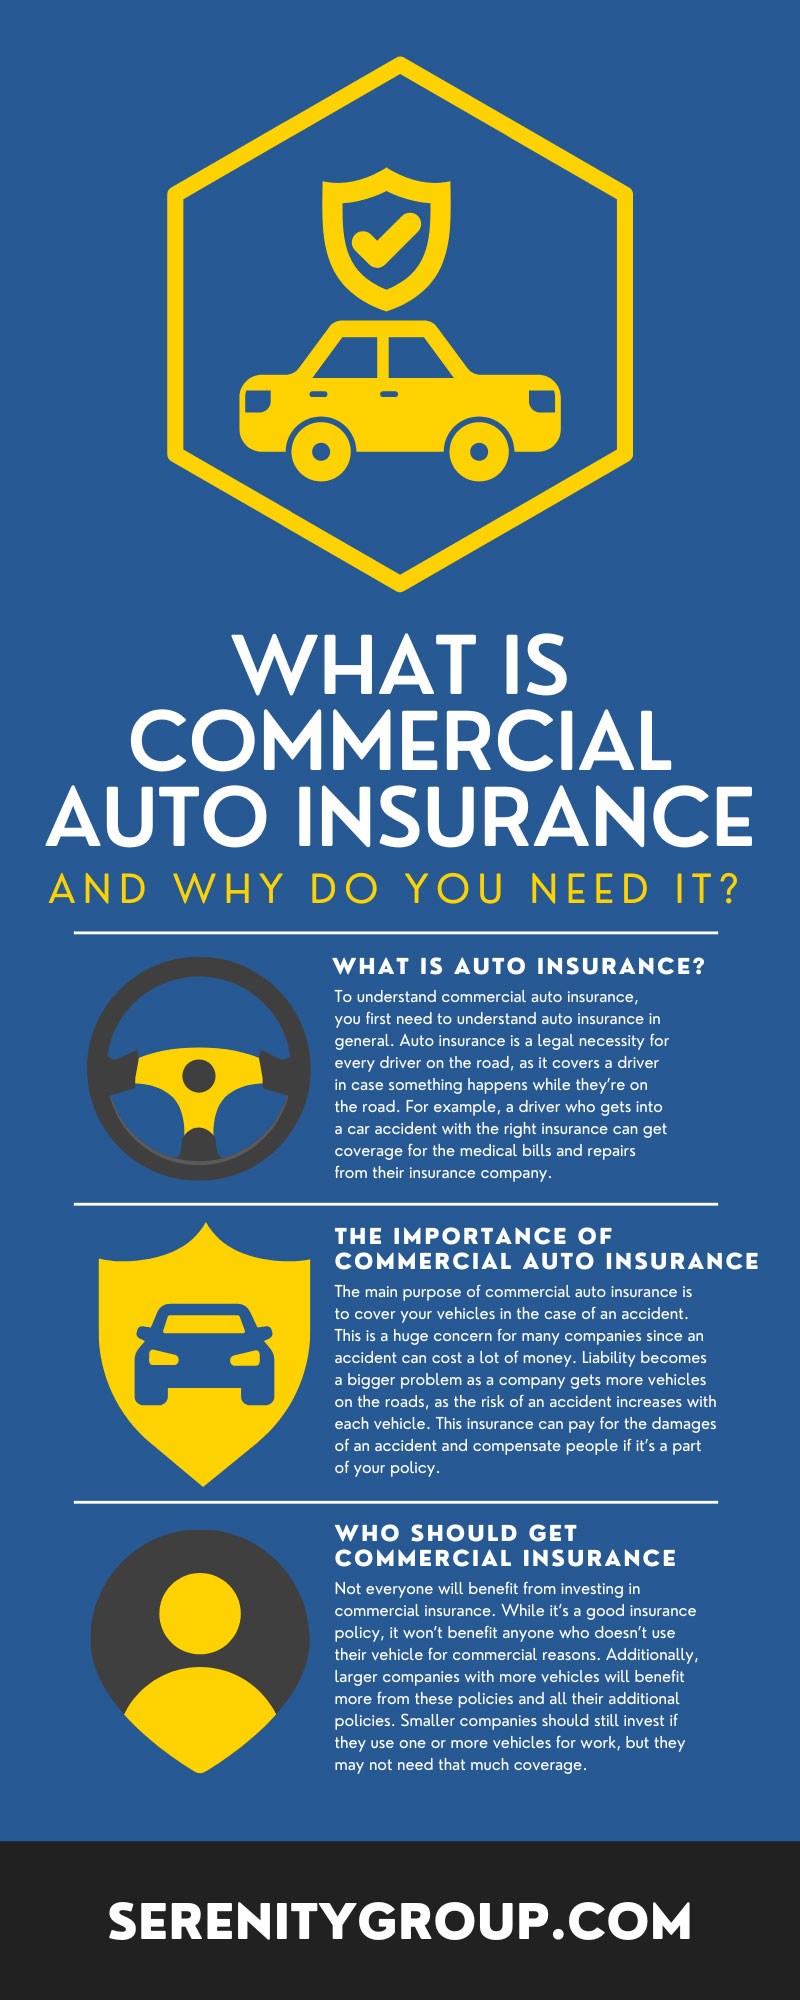 What Is Commercial Auto Insurance and Why Do You Need It?